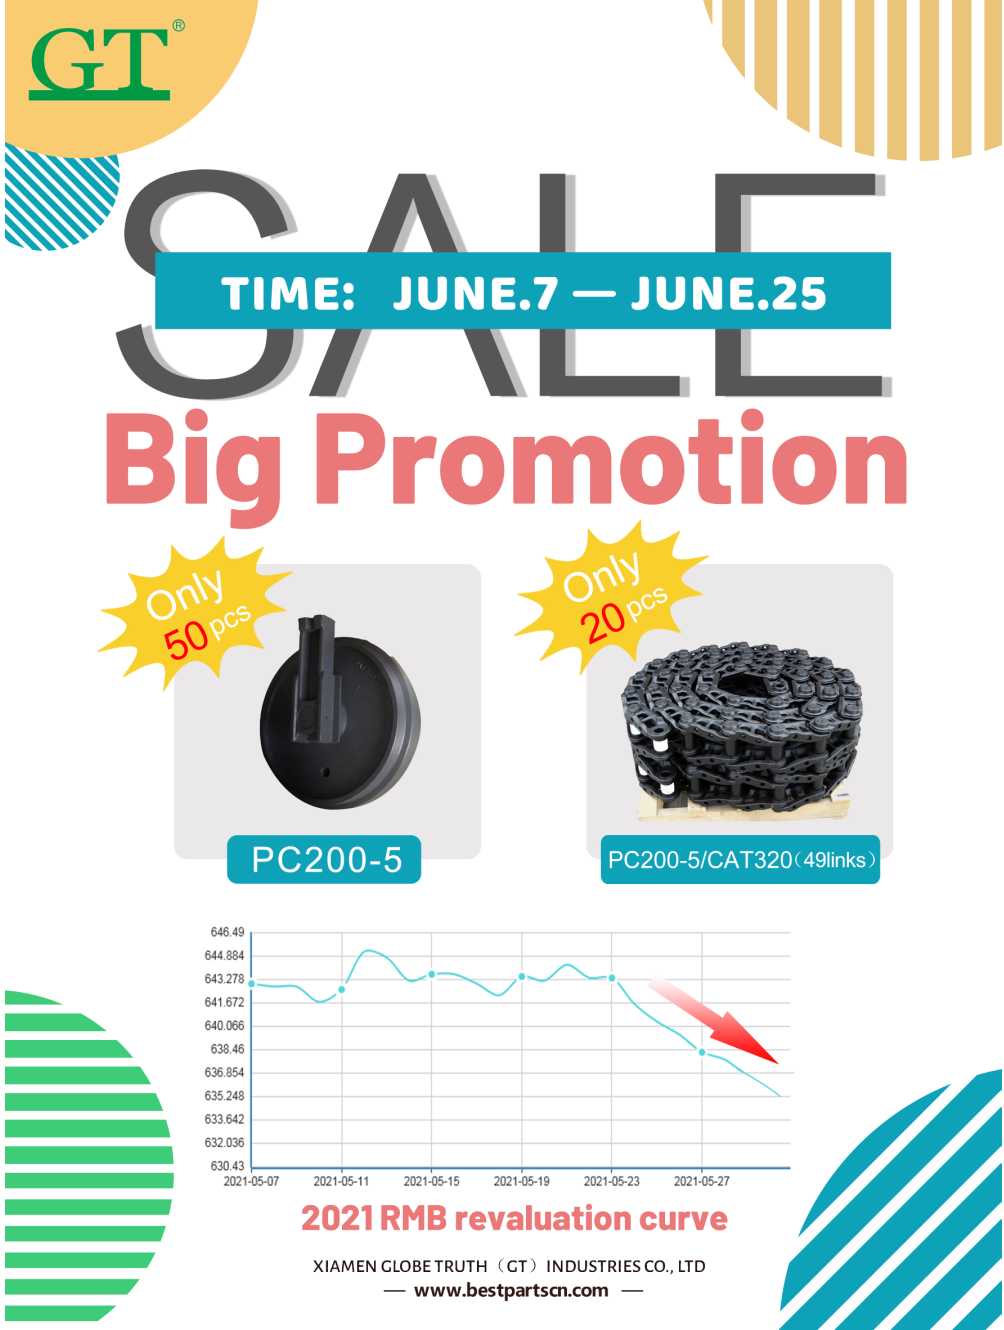 Big promotion for PC200-5 Idler and PC200-5/CAT320 Track chain